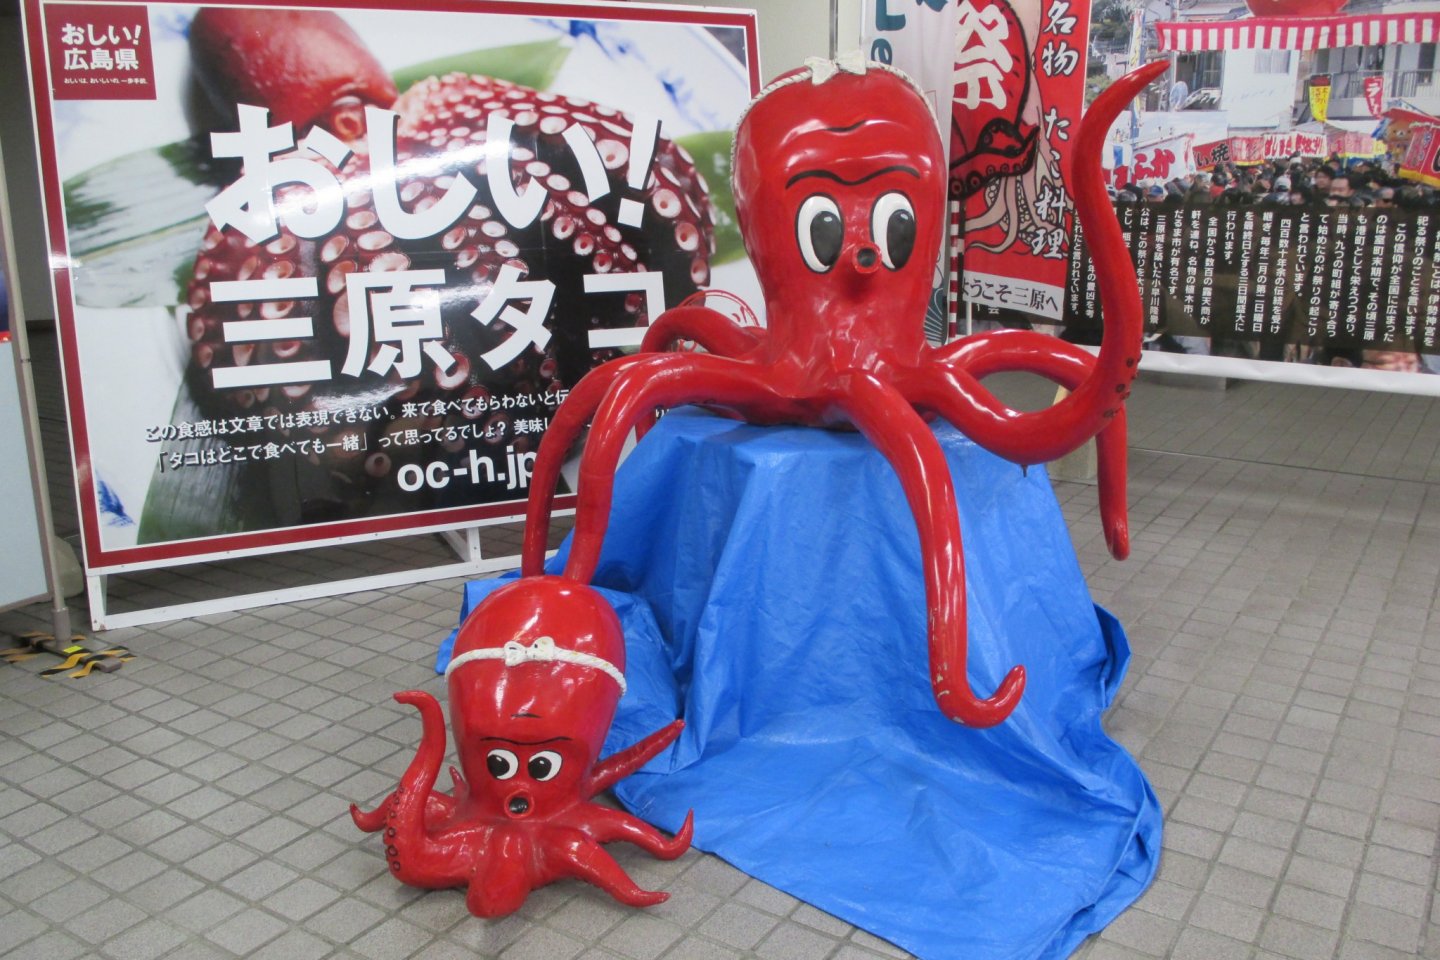 Octopus statues invite travelers to try Mihara's octopus